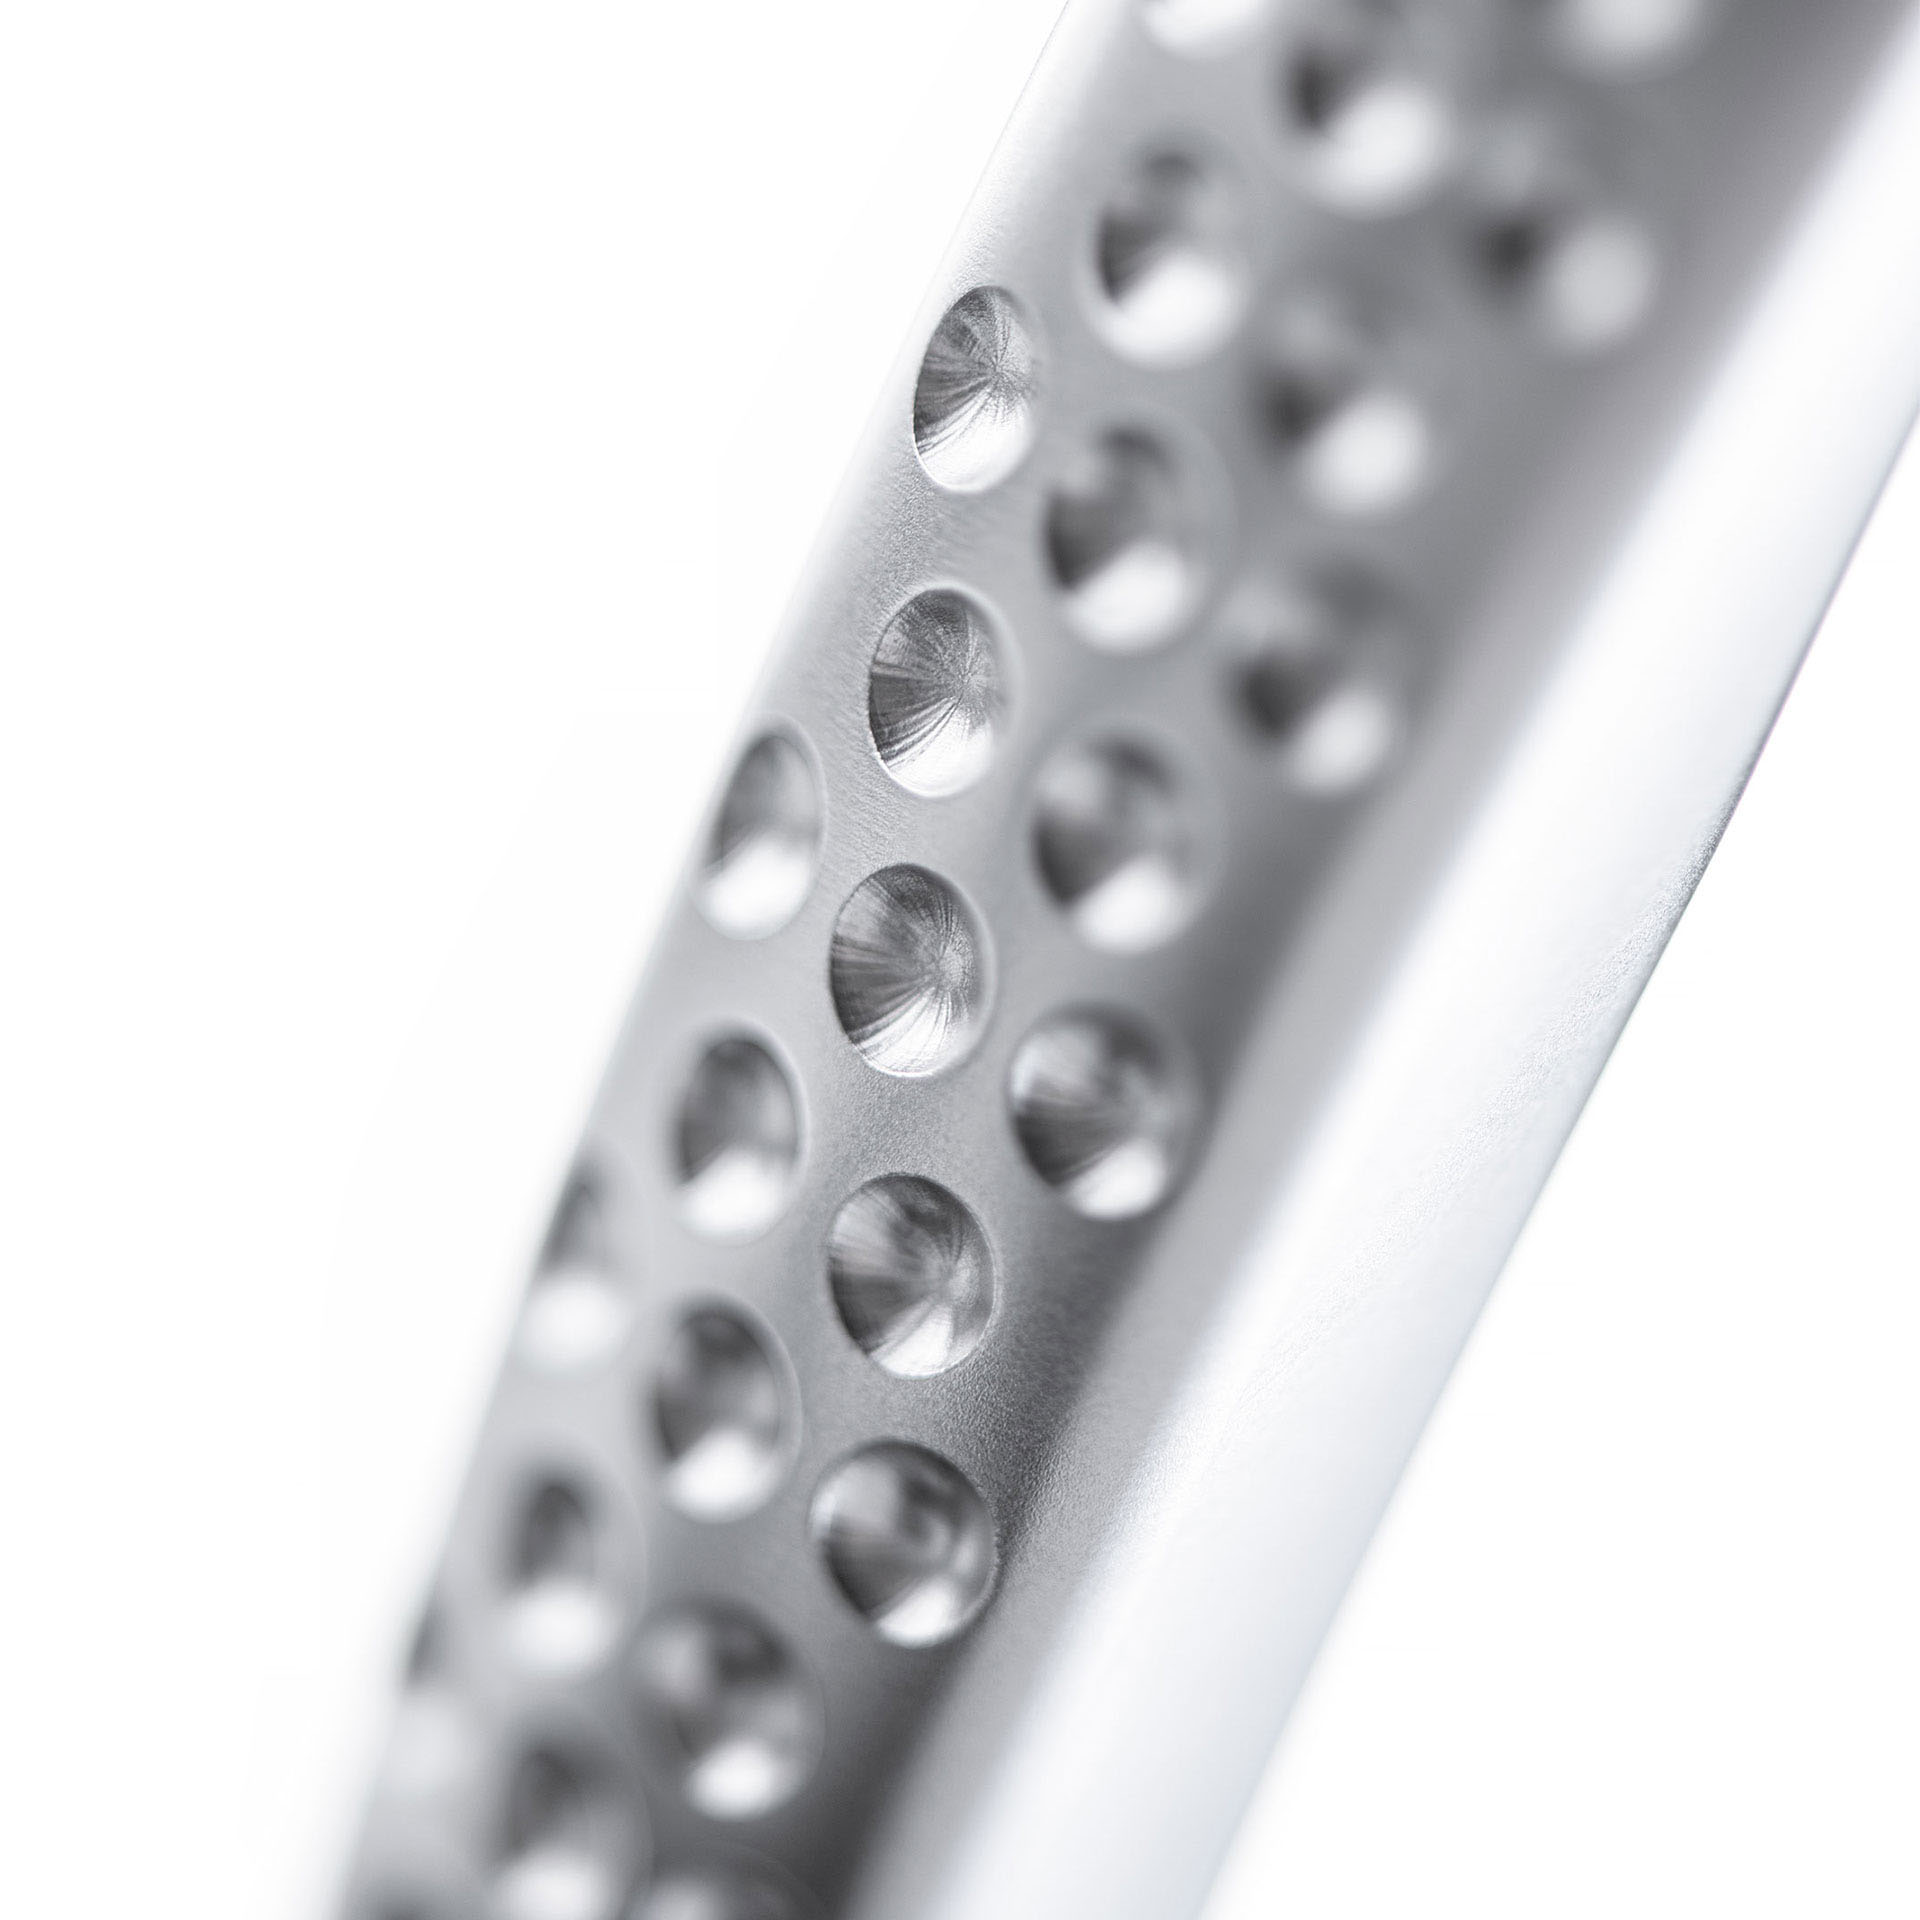 Fairgrip™ handle with advanced golfball-like dimple knurling, offering unprecedented precision and control in surgeries and significantly reducing hand fatigue.